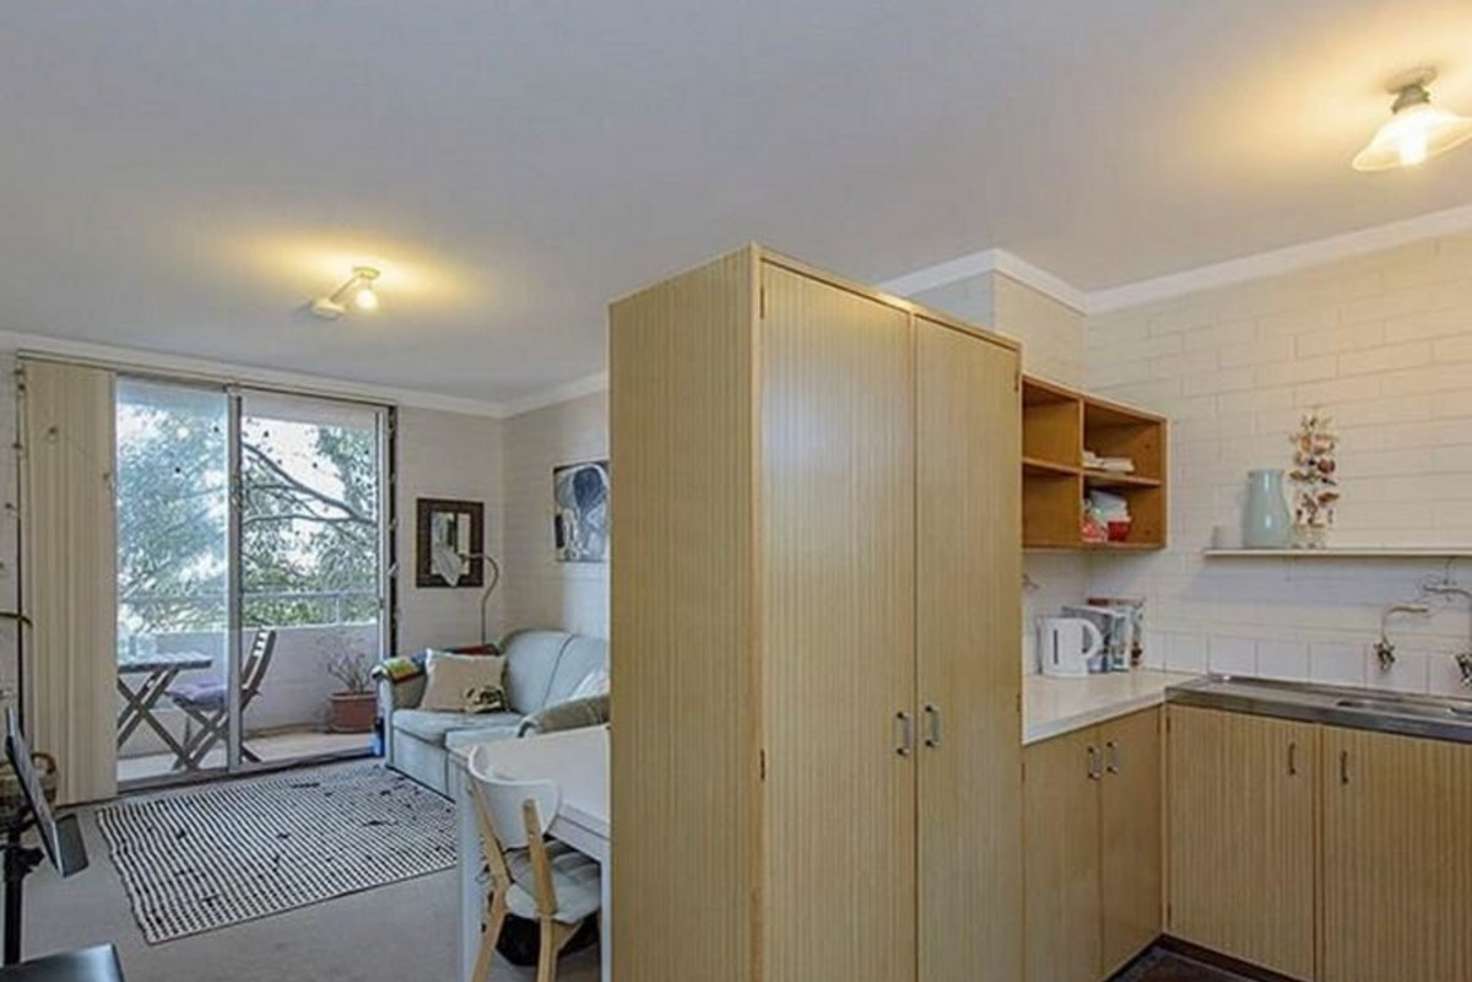 Main view of Homely apartment listing, 45/66 Cleaver Street, West Perth WA 6005